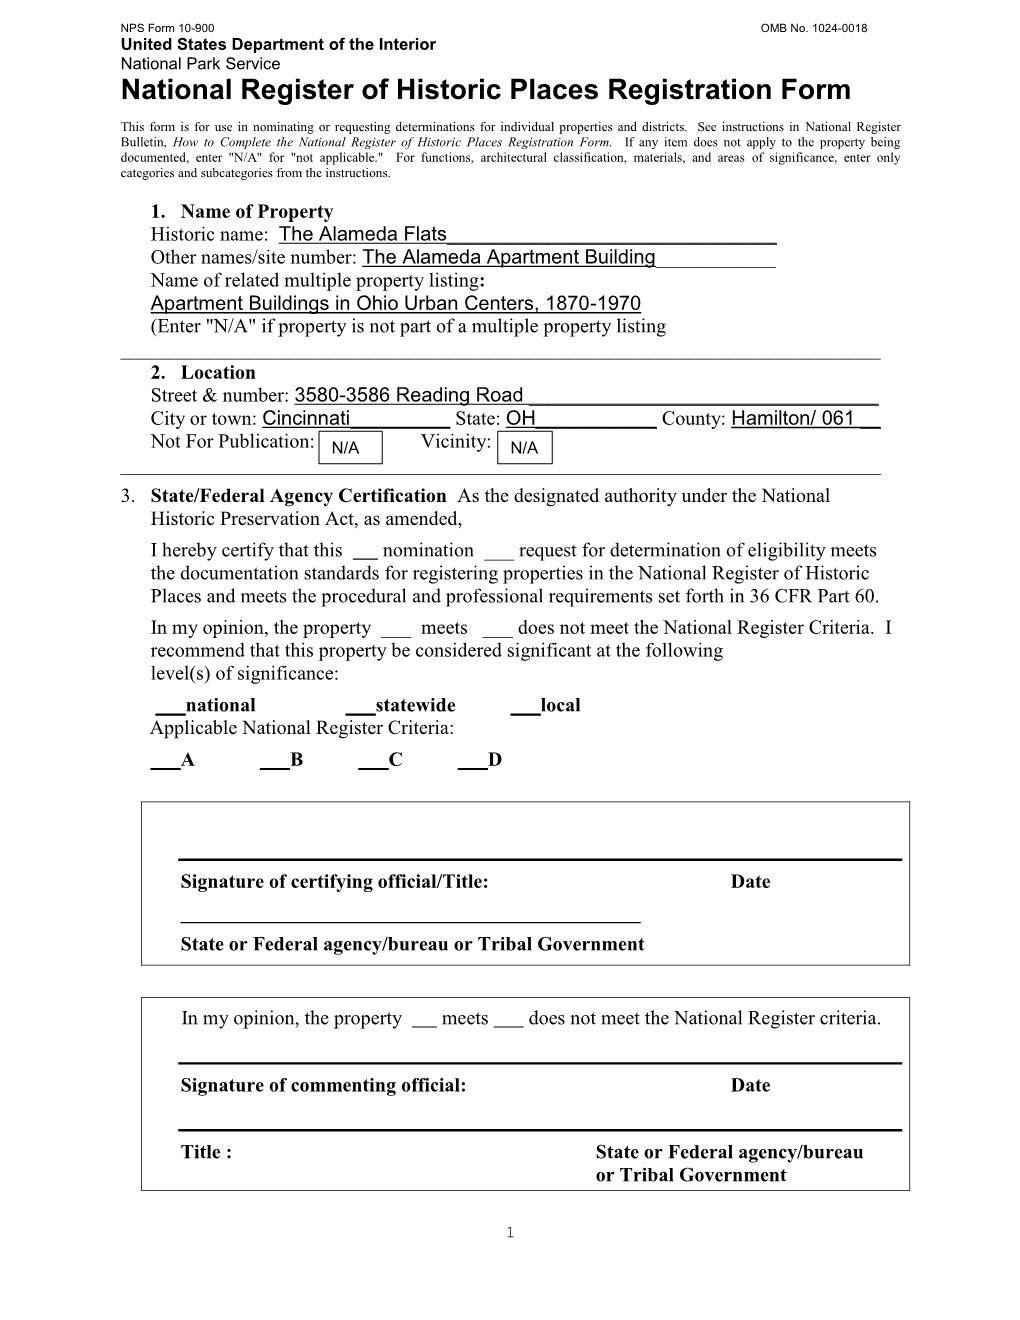 United States Department of the Interior National Park Service National Register of Historic Places Registration Form